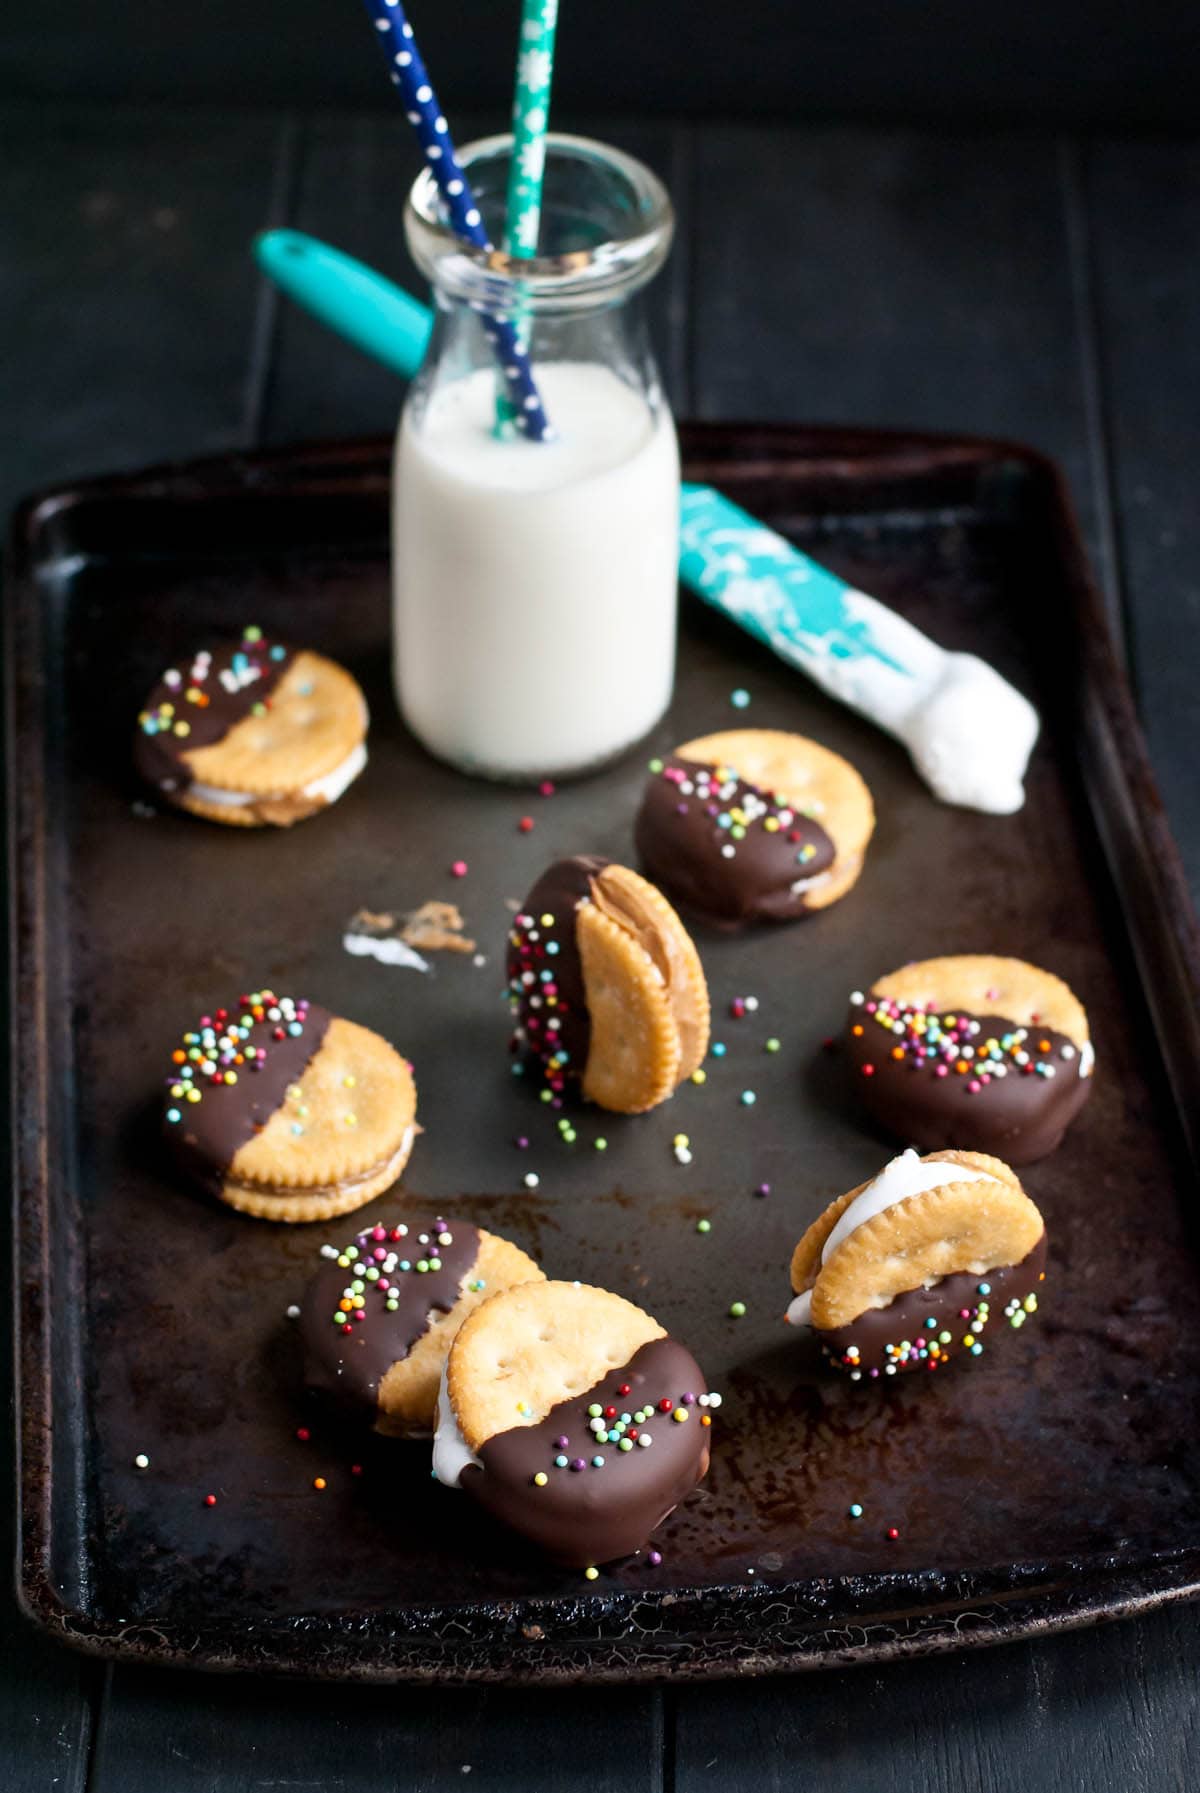 Chocolate Dipped Fluffernutter Ritz Cookies are a party favorite. With only four ingredients you probably already have in the pantry, these are a cinch to make!